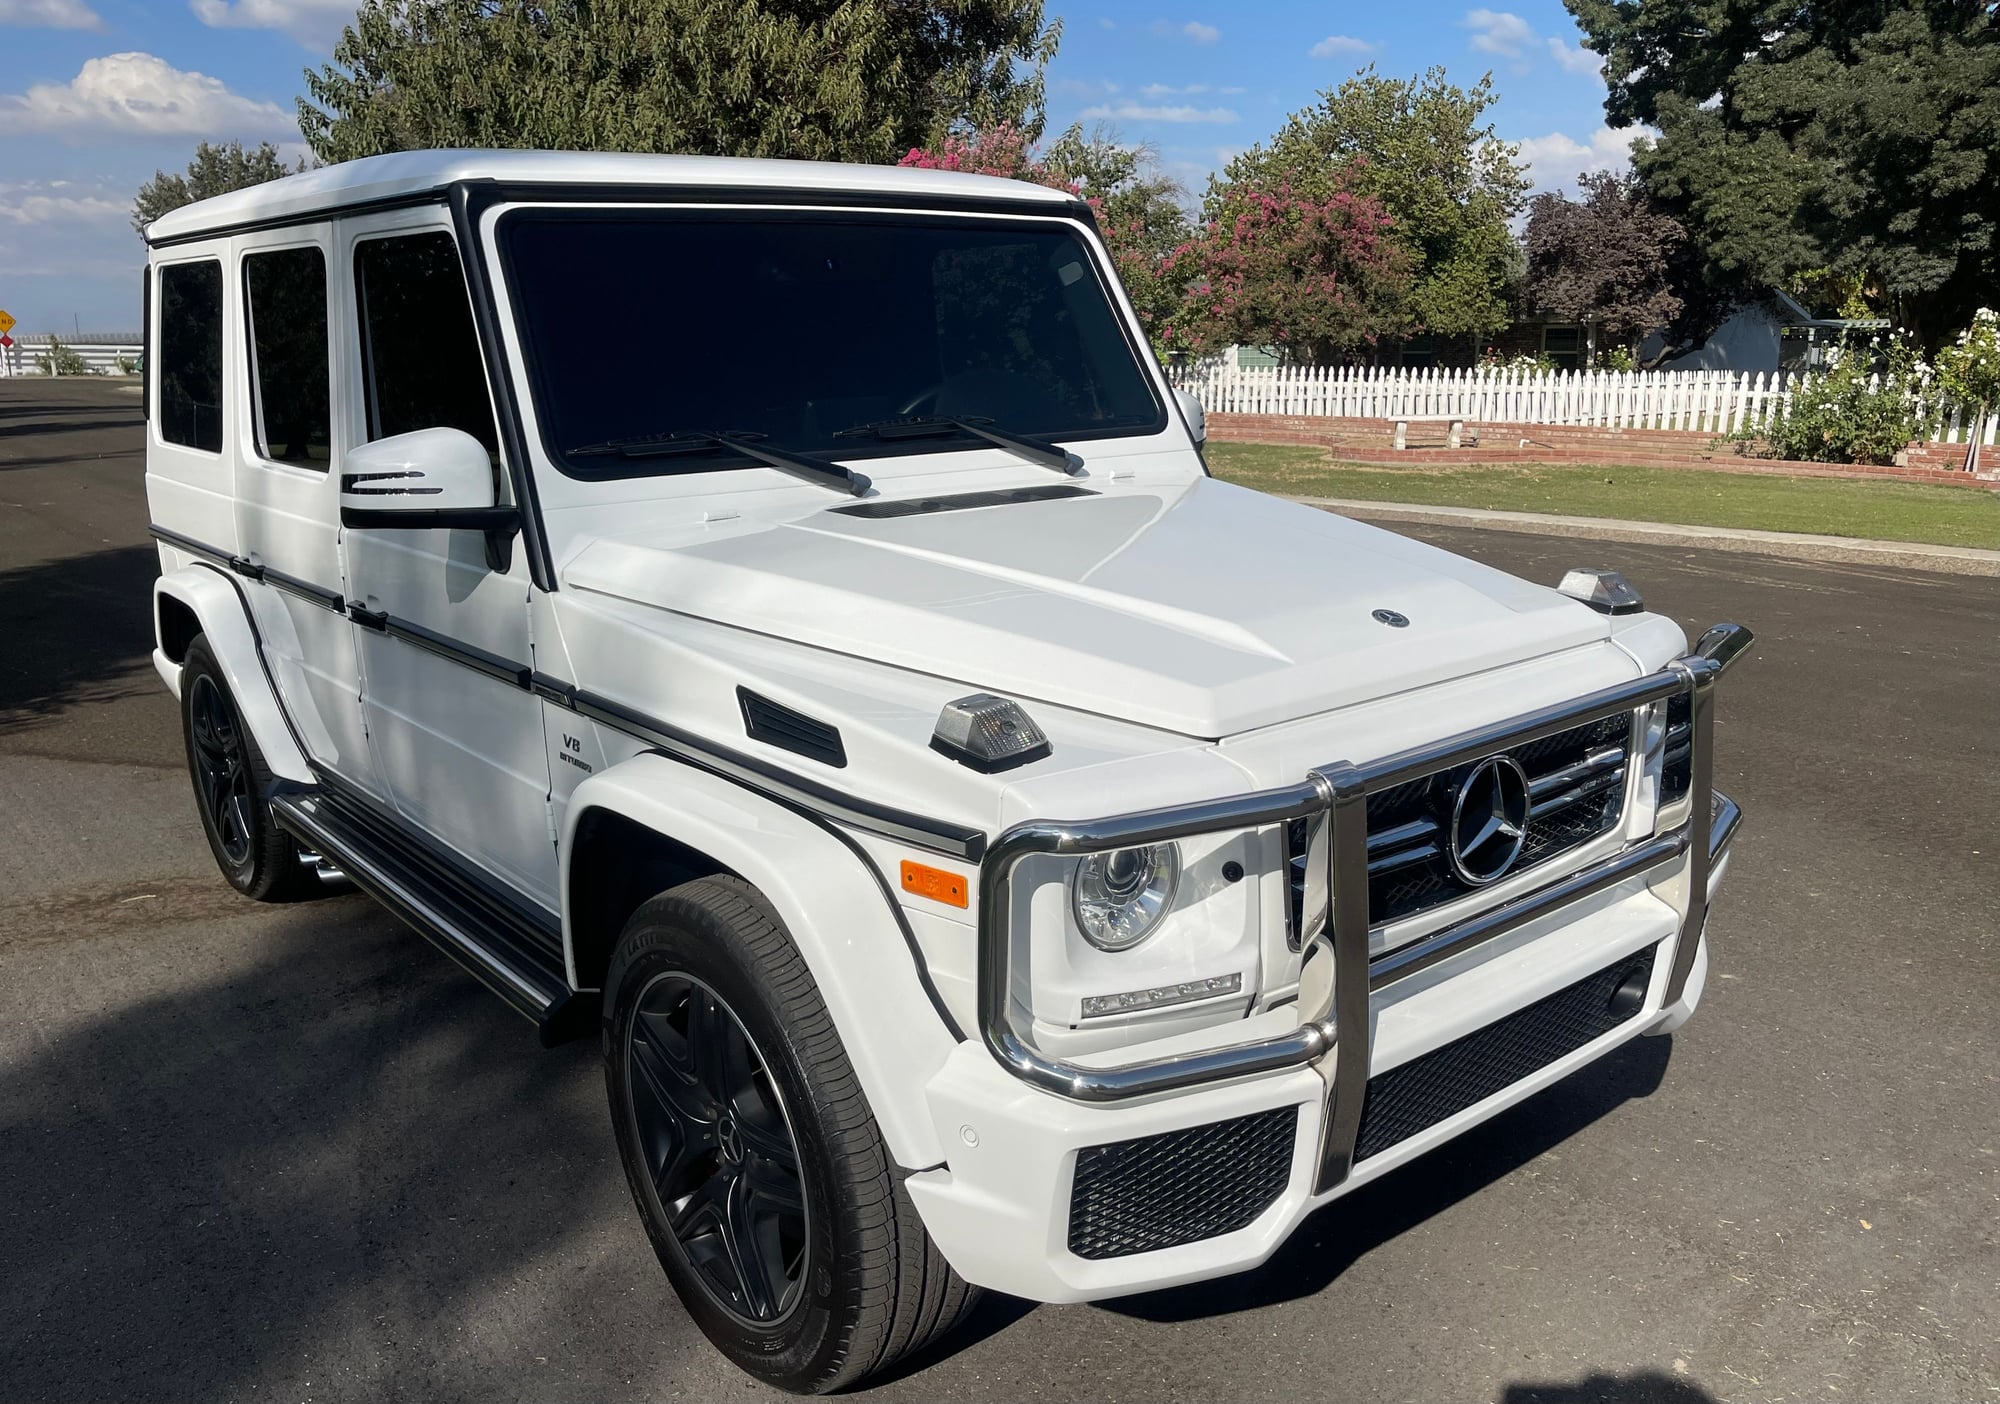 2018 Mercedes-Benz G63 AMG - Mercedes G63 Amg - Used - VIN WDCYC7DH1JX289637 - 44,000 Miles - 8 cyl - White - Fresno, CA 93706, United States